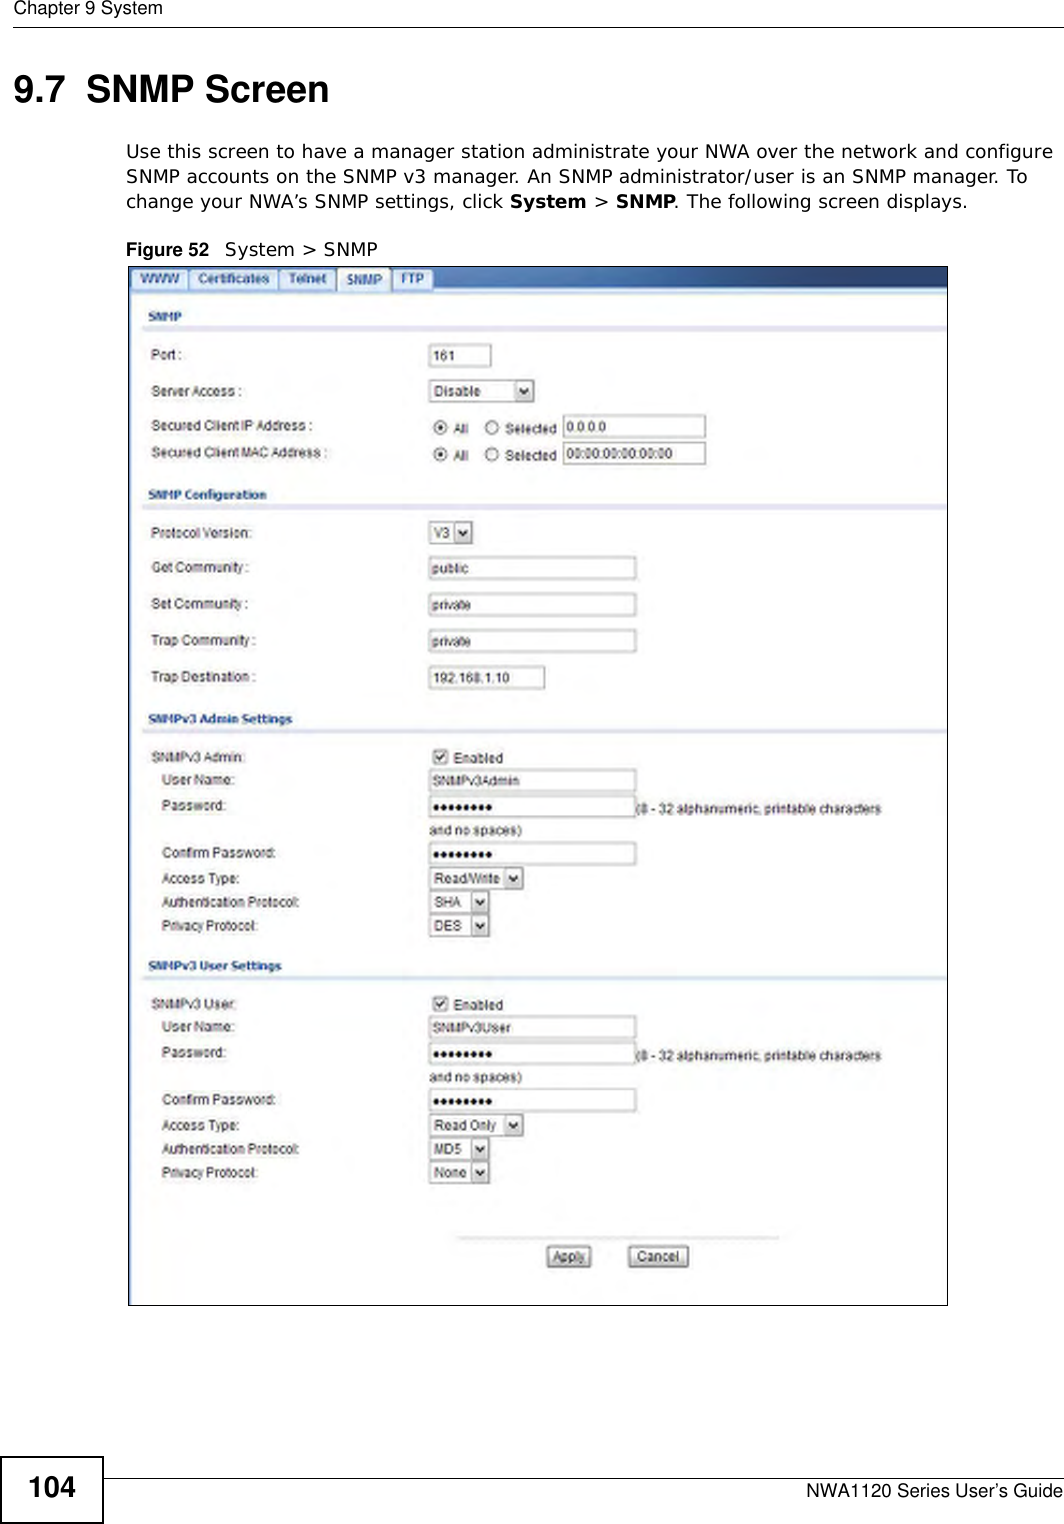 Chapter 9 SystemNWA1120 Series User’s Guide1049.7  SNMP ScreenUse this screen to have a manager station administrate your NWA over the network and configure SNMP accounts on the SNMP v3 manager. An SNMP administrator/user is an SNMP manager. To change your NWA’s SNMP settings, click System &gt; SNMP. The following screen displays.Figure 52   System &gt; SNMP